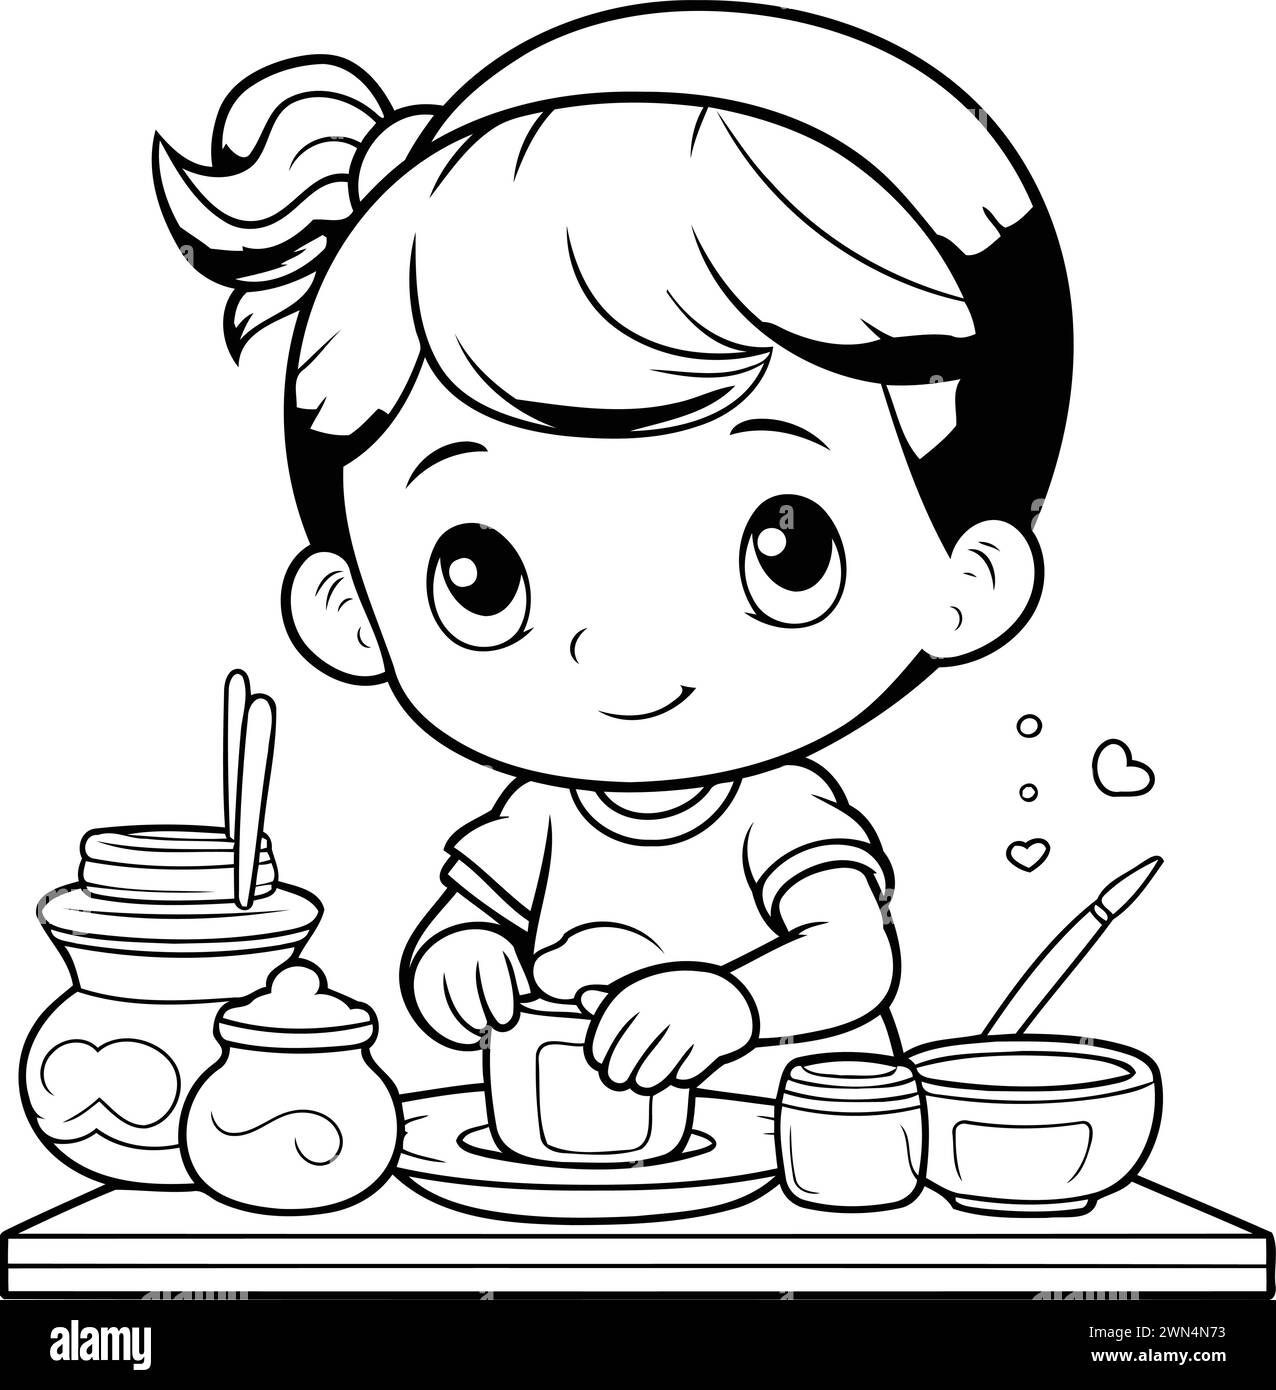 Black and White Cartoon Illustration of Little Girl Preparing Food for Coloring Book Stock Vector